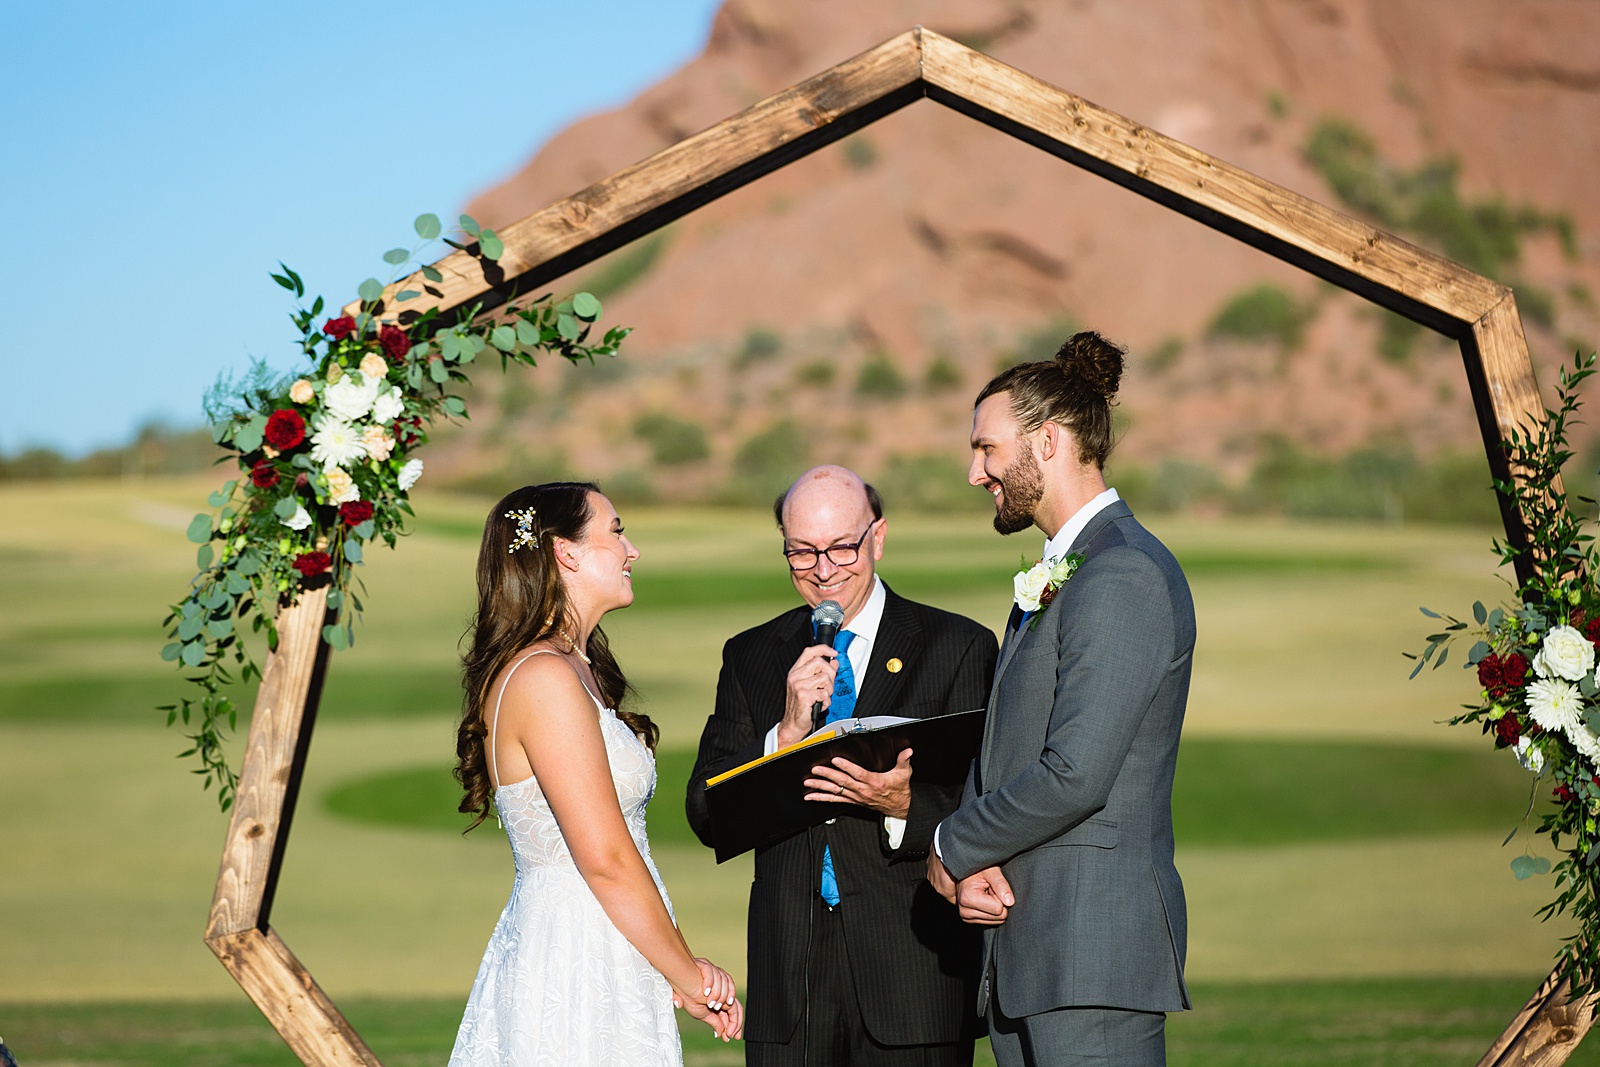 Bride and groom togethering during Papago Events wedding ceremony by Phoenix wedding photographer PMA Photography.